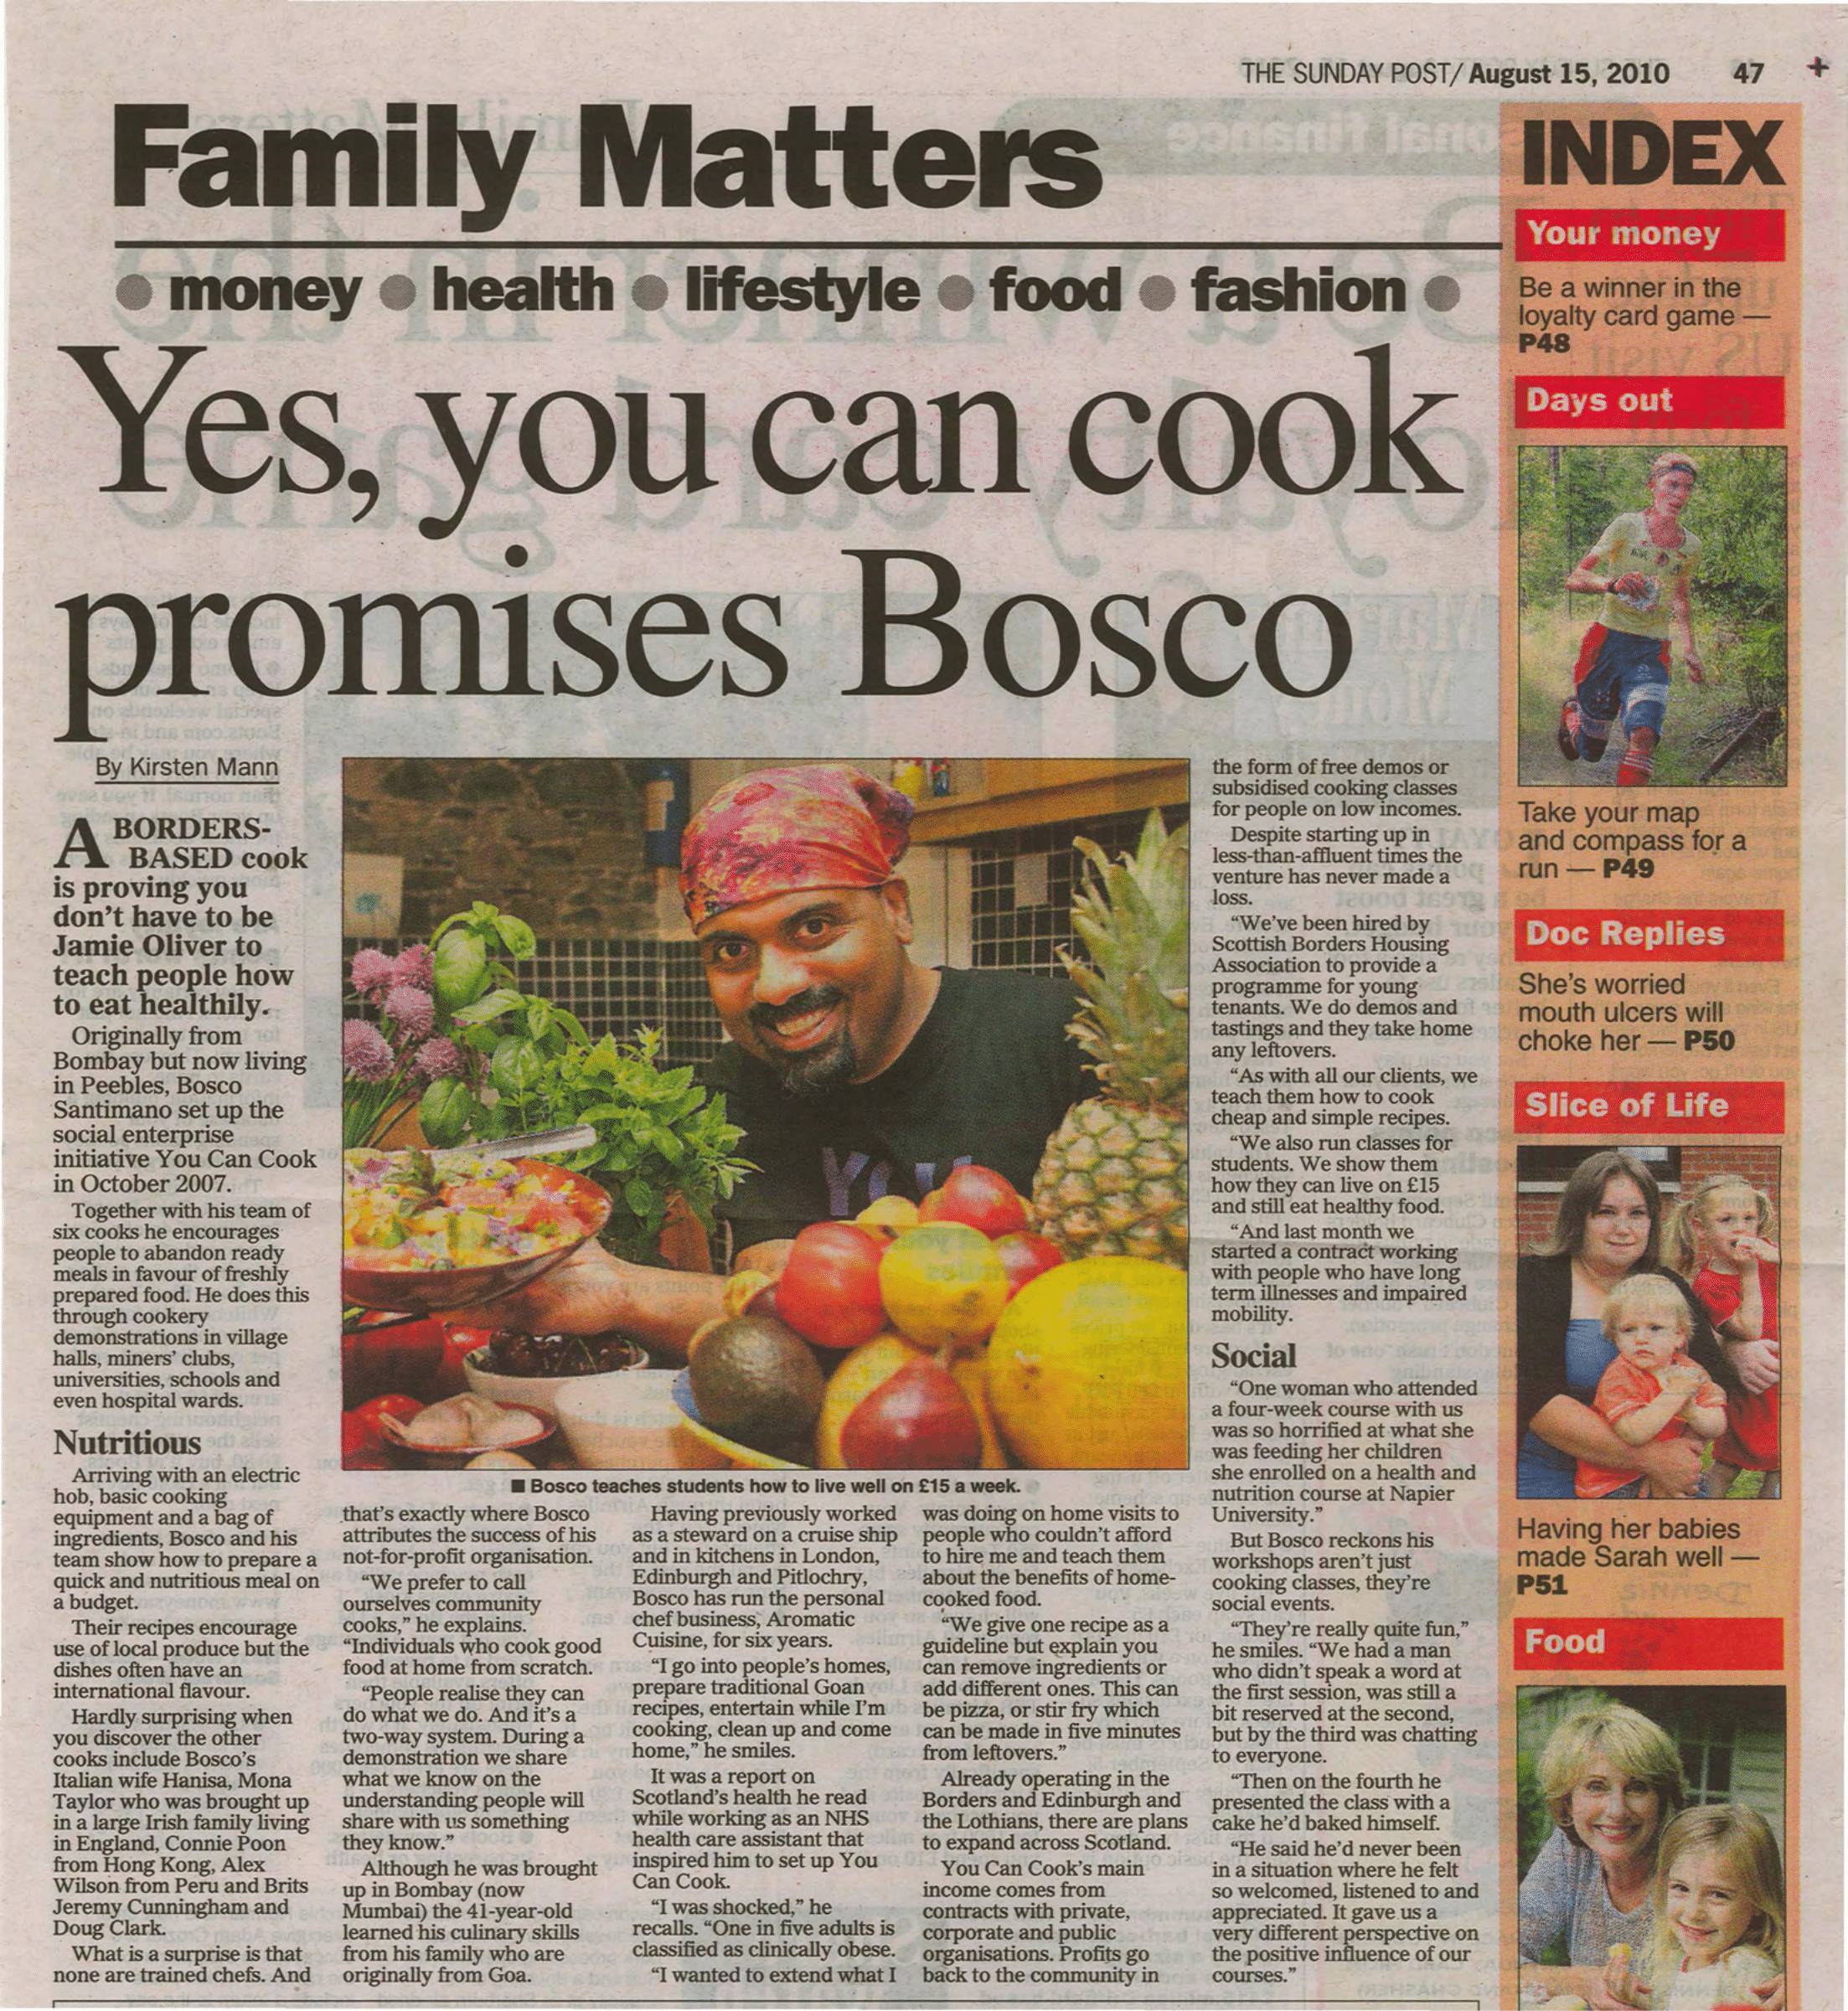 Press Clipping: Yes, you can cook promises Bosco